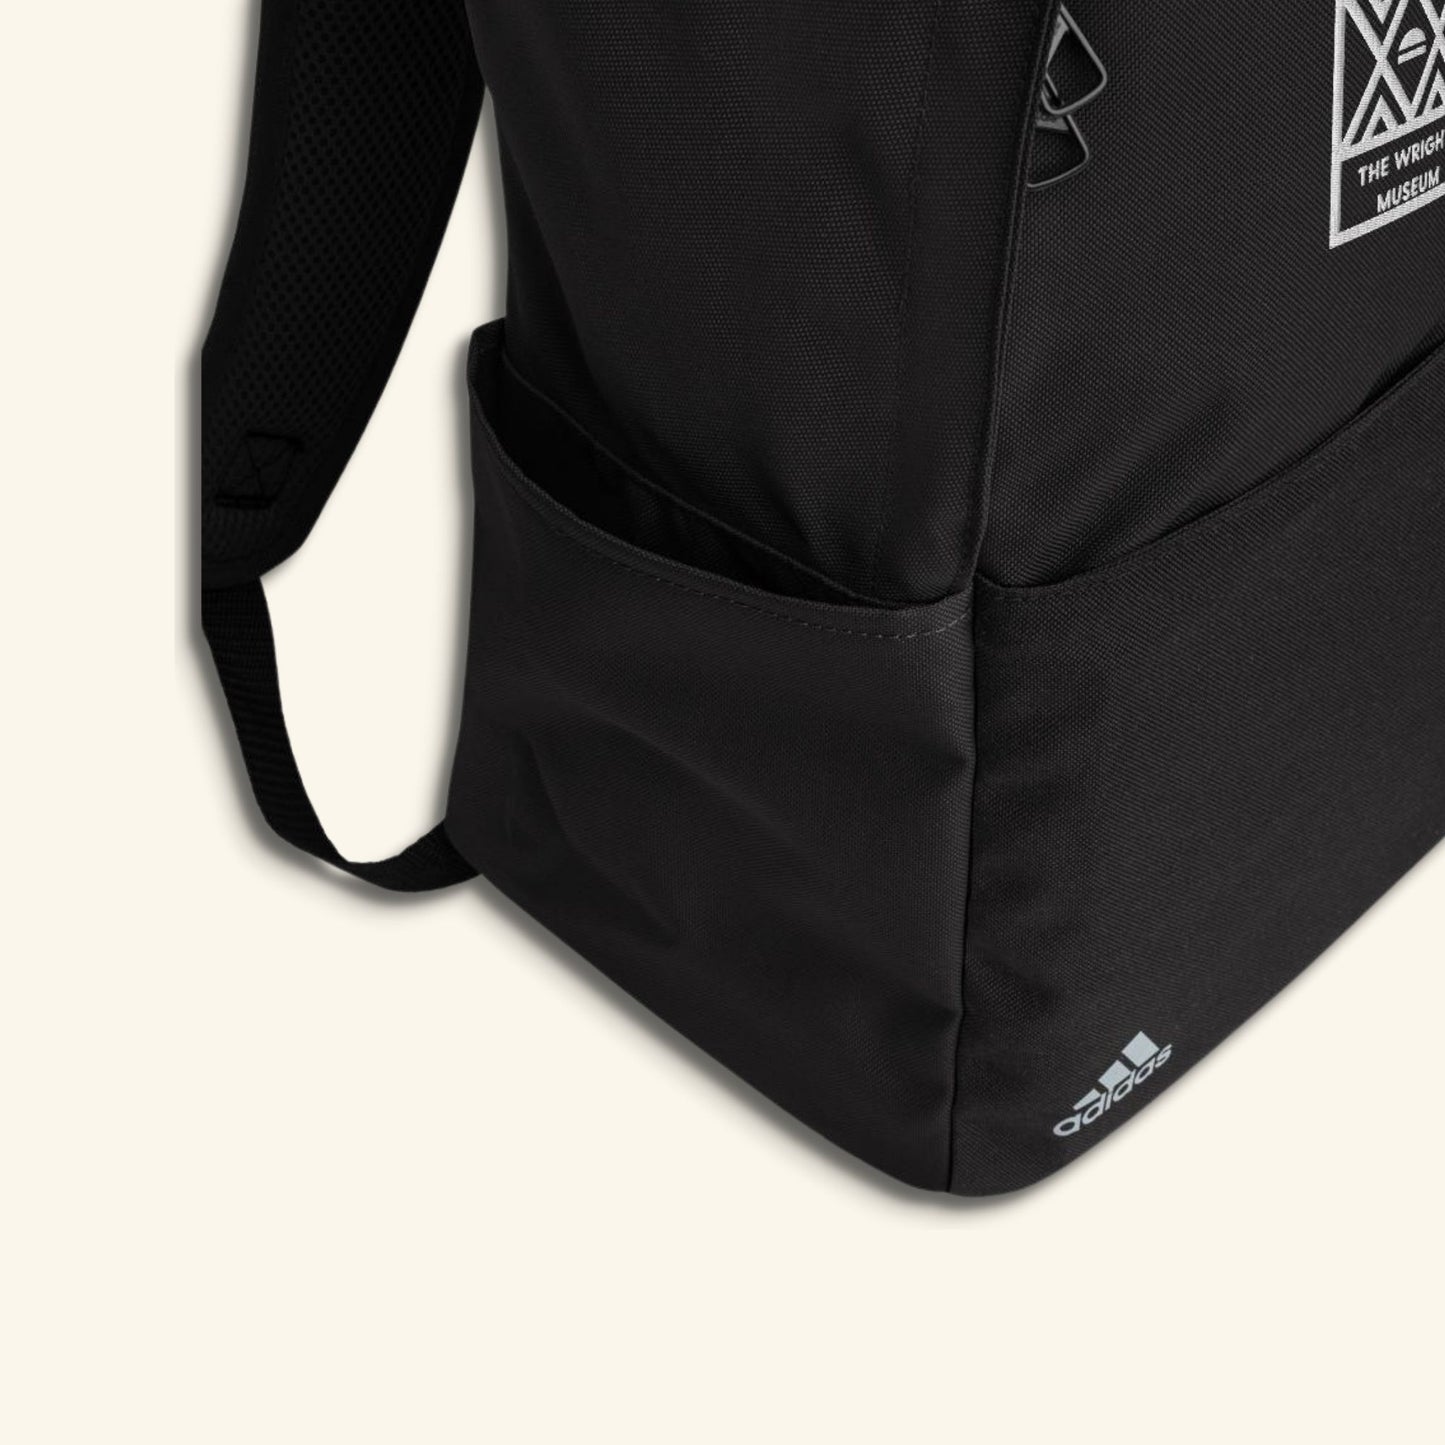 Wright Museum Embroidered Adidas Backpack